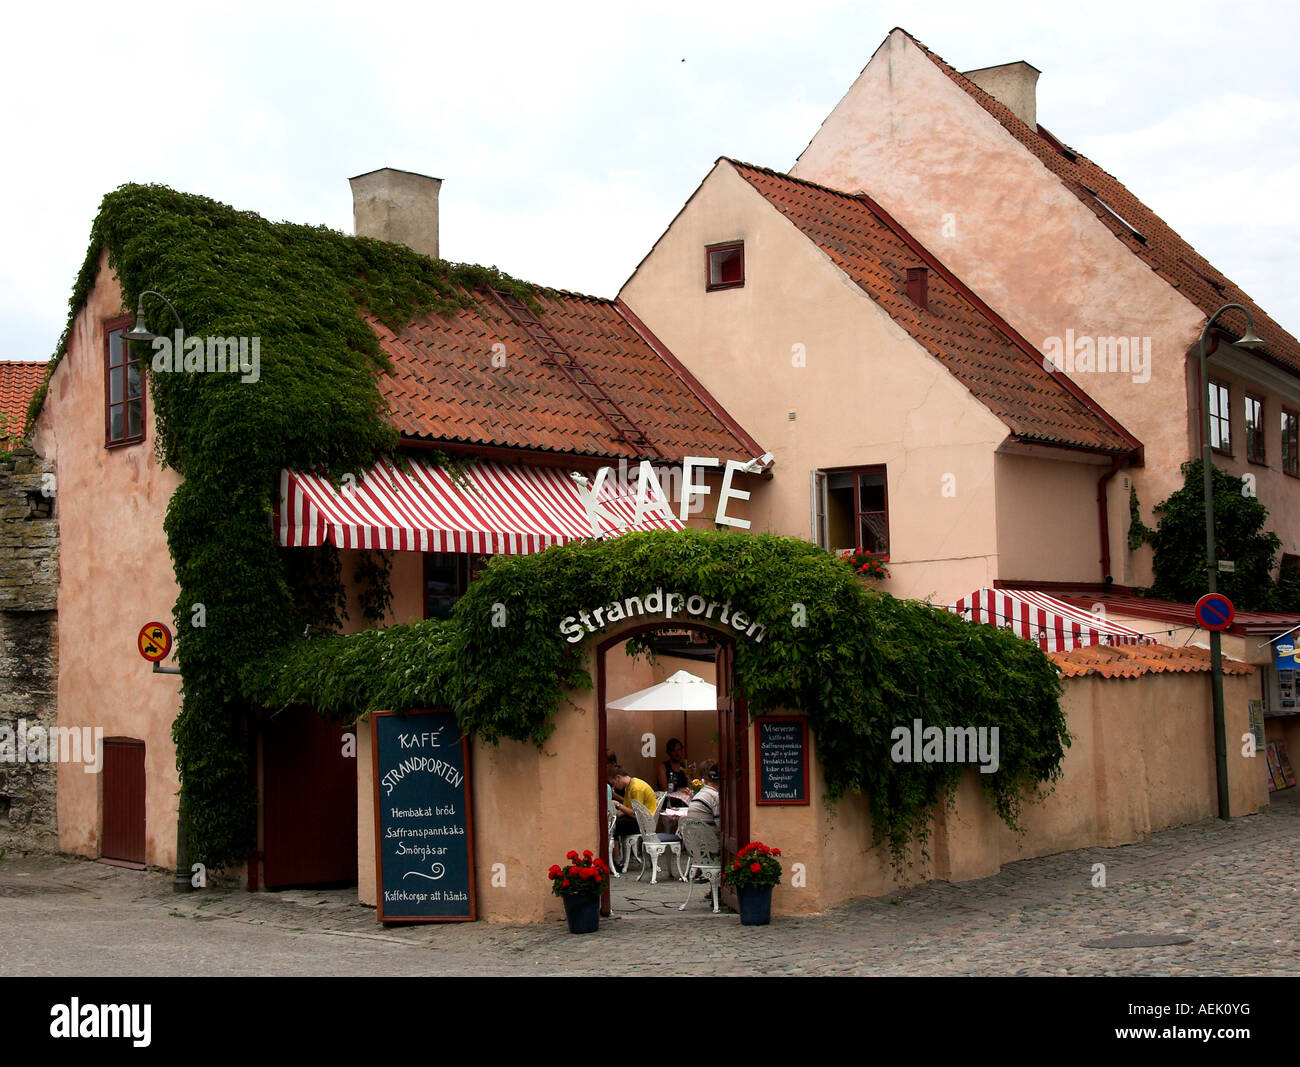 Cafe in Visby, Gotland, Sweden Stock Photo